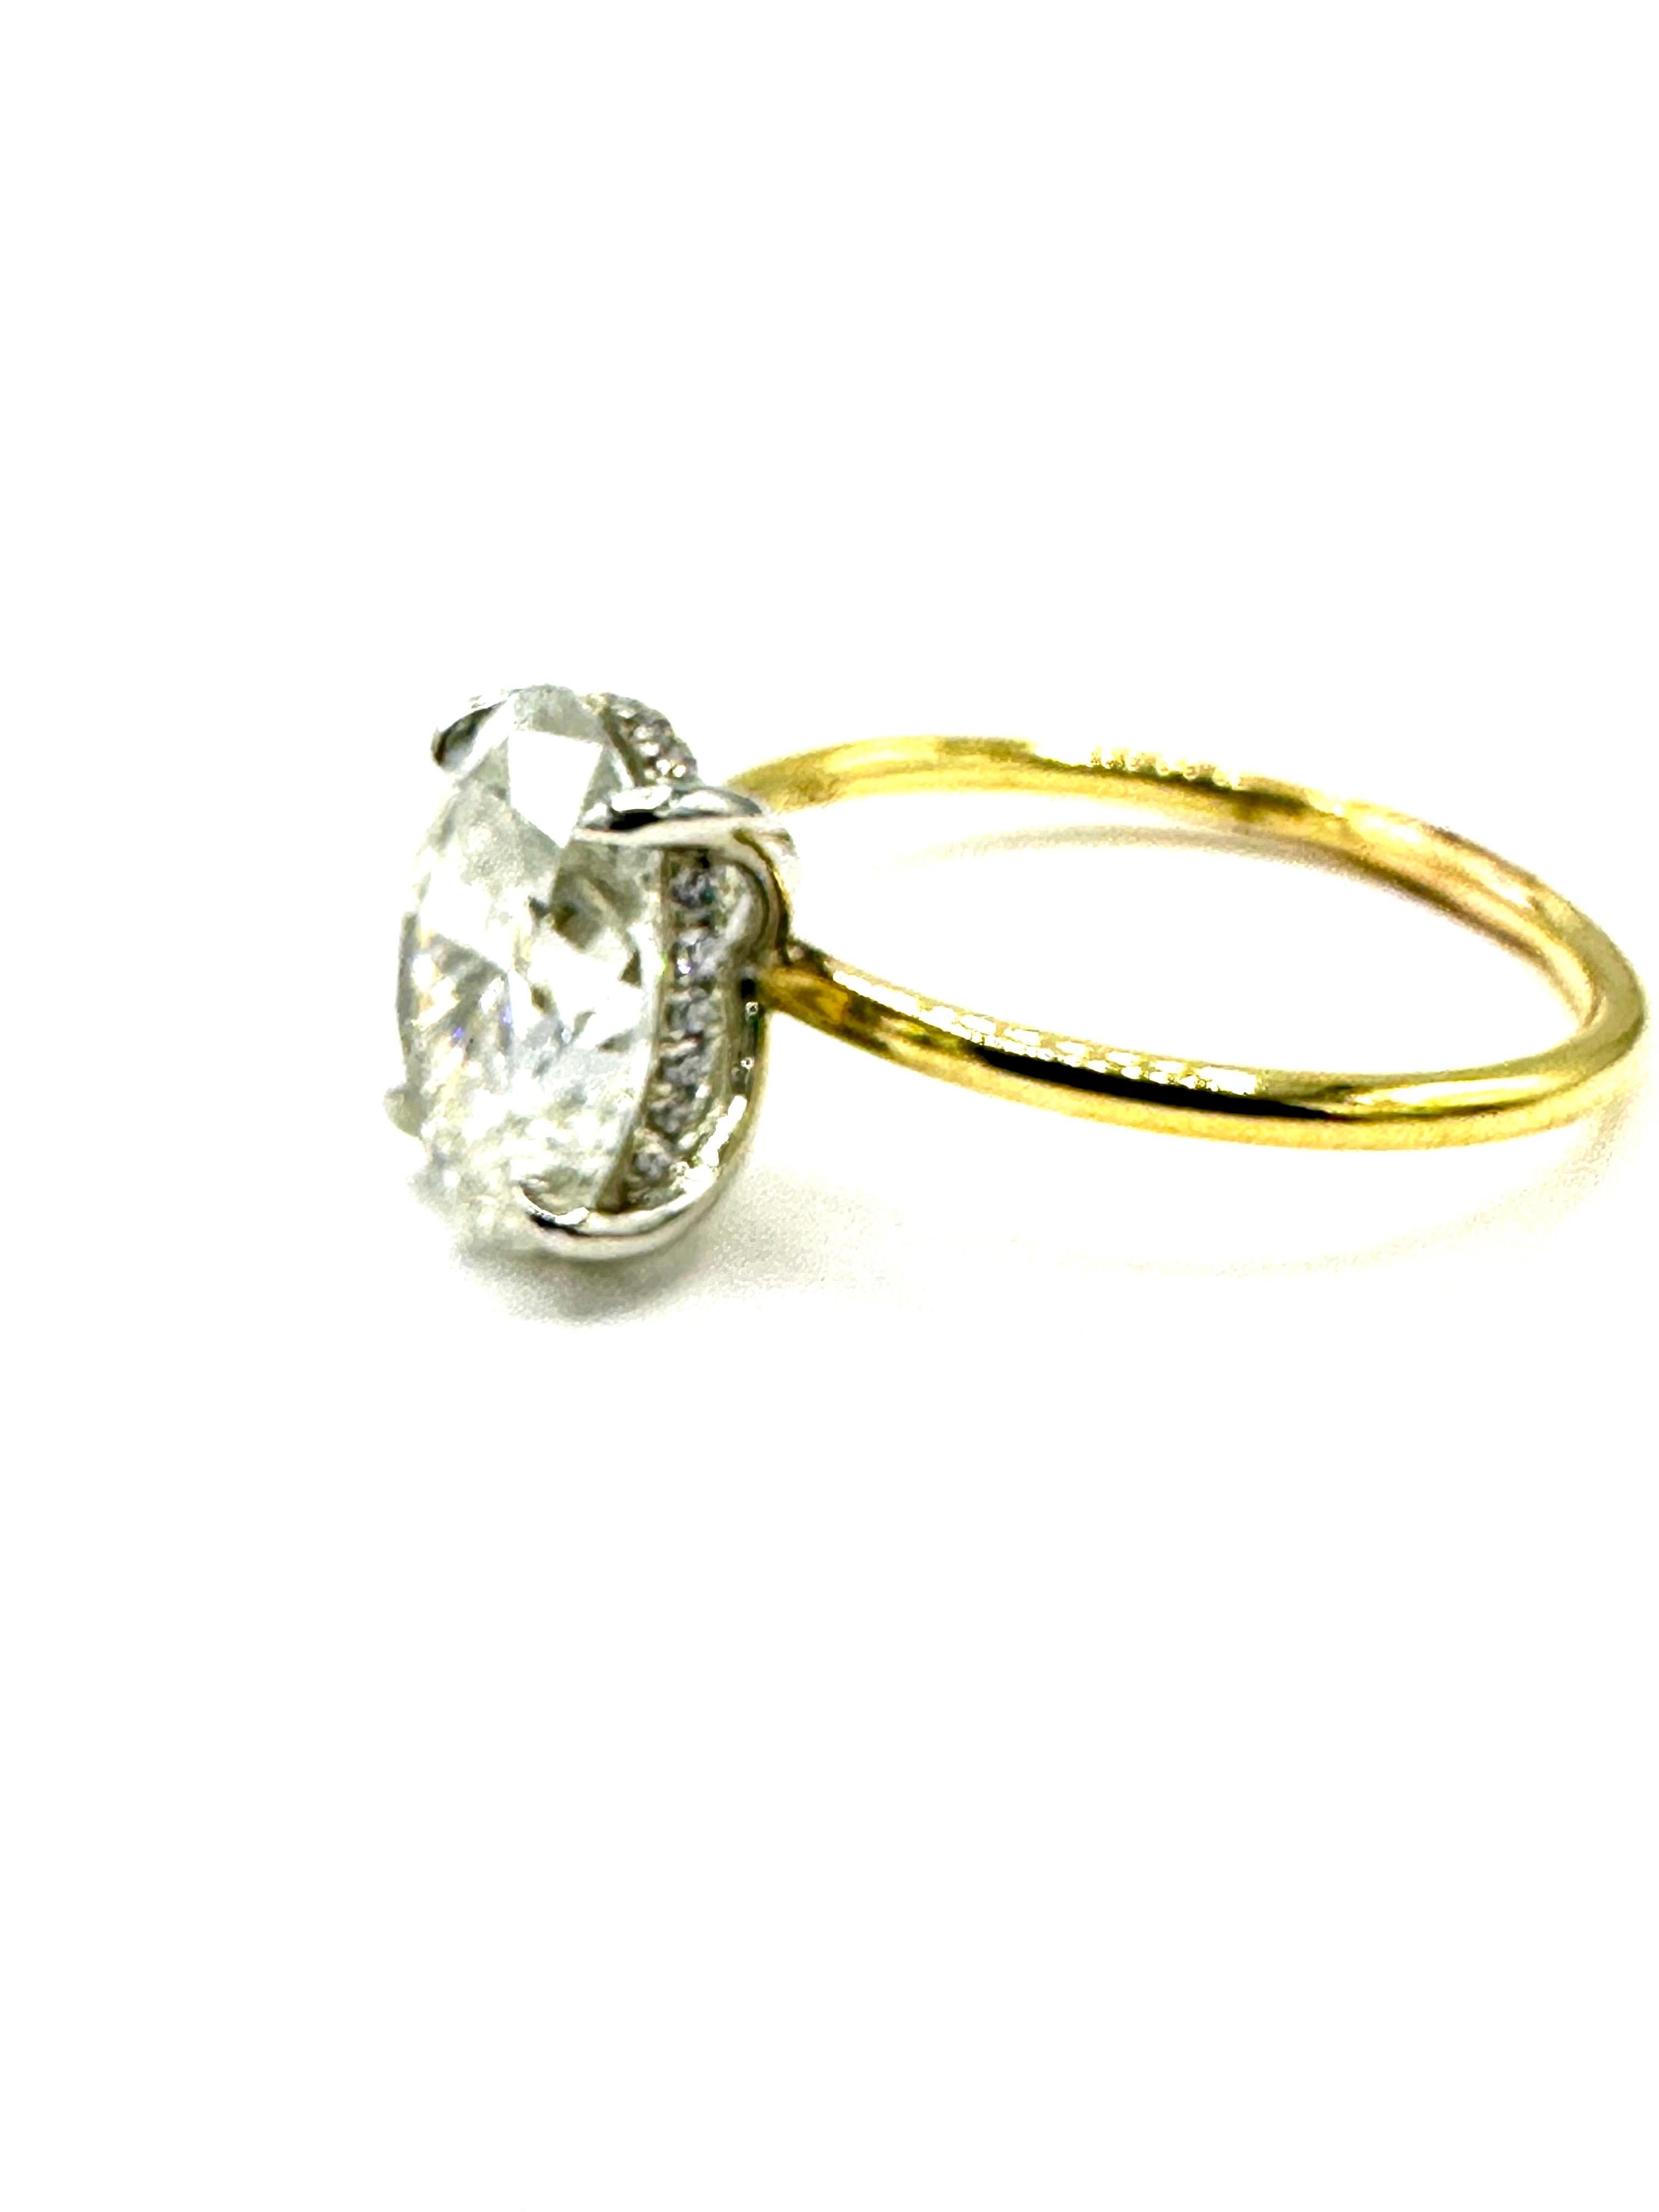 Modern 2.51 Carat Oval Brilliant Diamond and 18K Yellow Gold Engagement Ring  For Sale